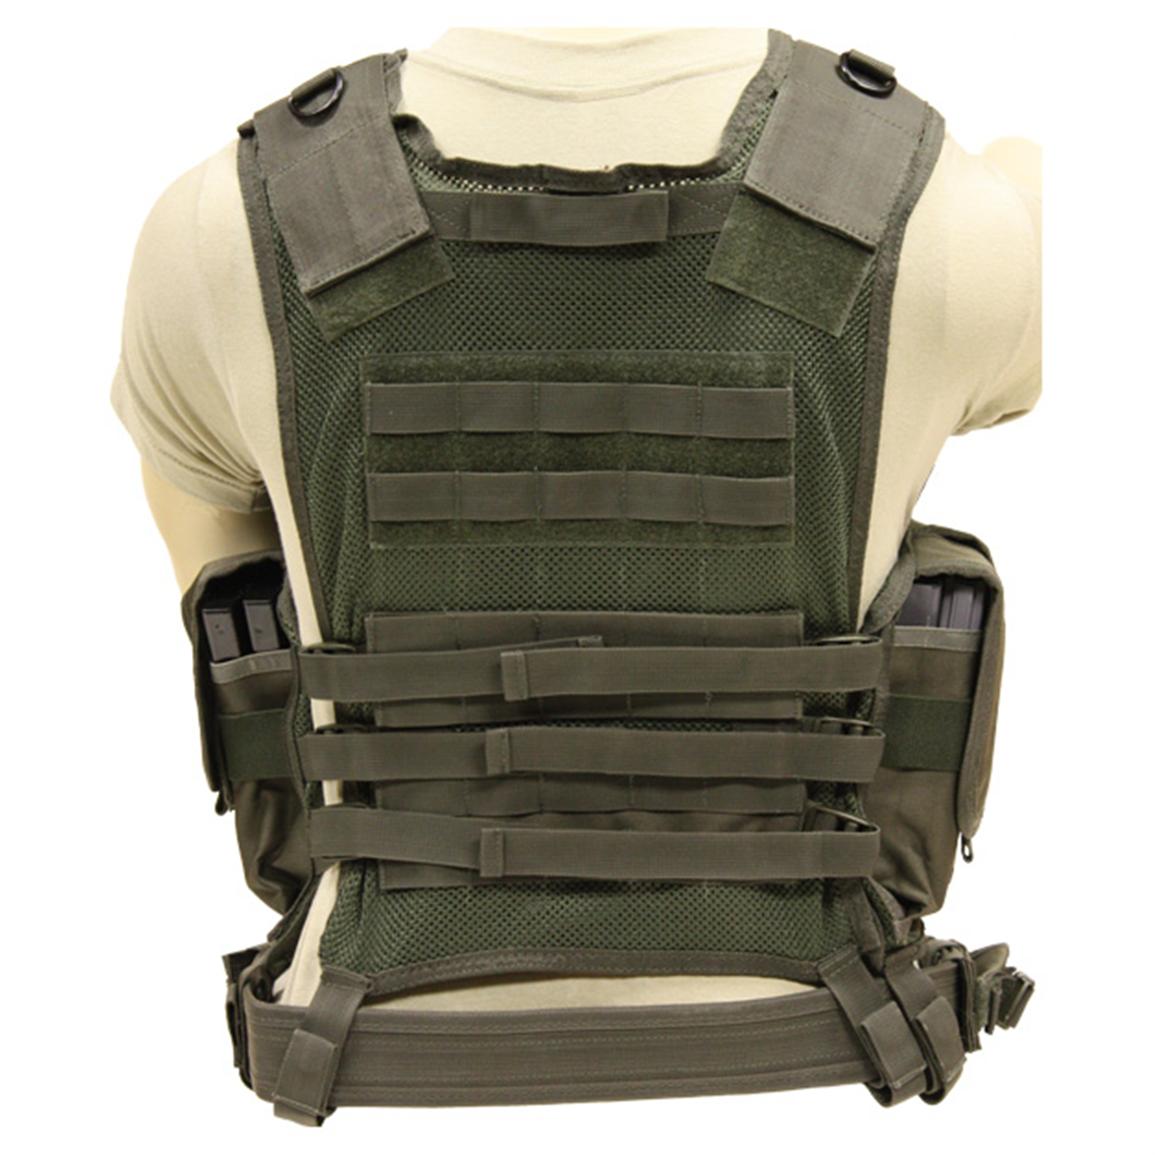 Red Rock Outdoor Gear Cross Draw Vest - 299883, Tactical Clothing at ...